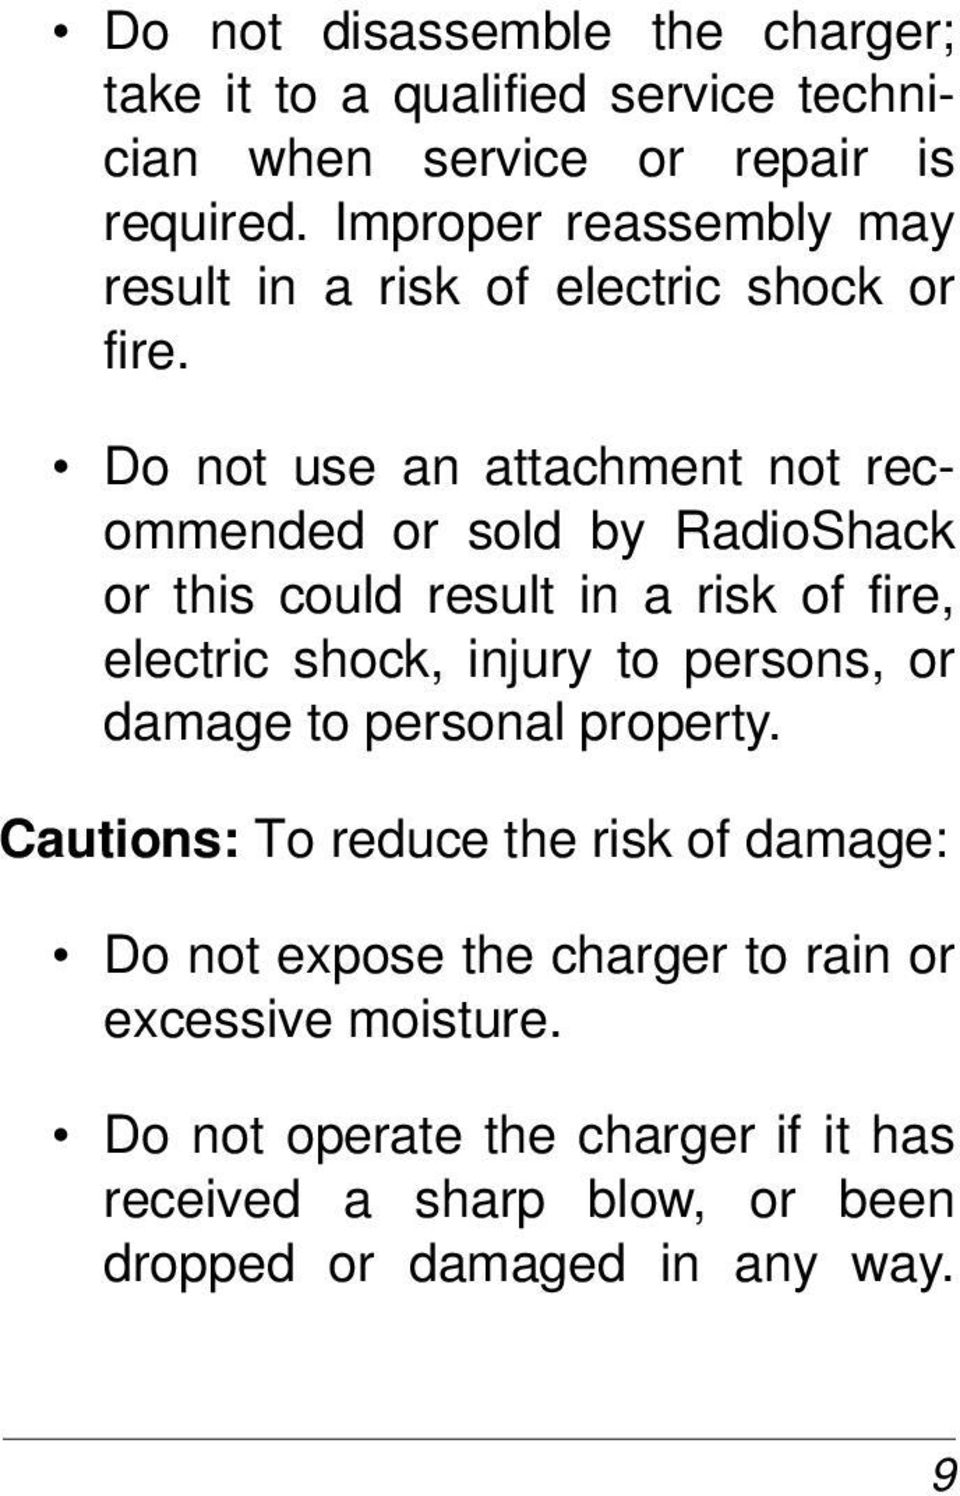 Do not use an attachment not recommended or sold by RadioShack or this could result in a risk of fire, electric shock, injury to